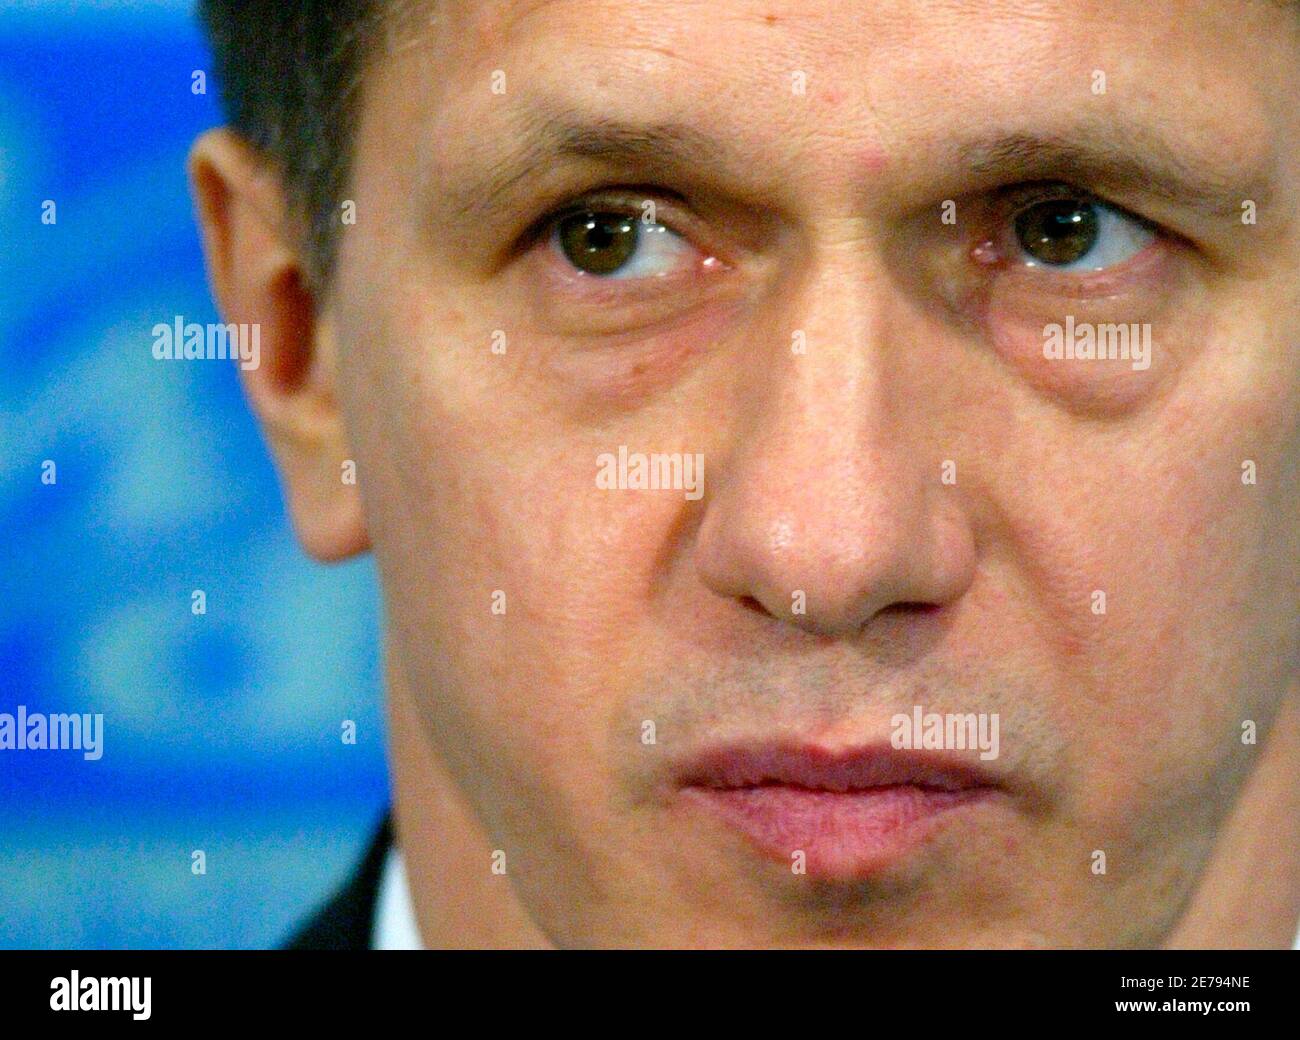 Russia's Natural Resources Minister Yuri Trutnev attends a news conference in Moscow on the results of his trip to Sakhalin in the country's far east, October 27, 2006. Trutnev said on Friday that British-Russian oil firm TNK-BP, which is half-owned by BP Plc, had the worst record of exploiting oil wells in Russia.   REUTERS/Anton Denisov (RUSSIA) Stock Photo